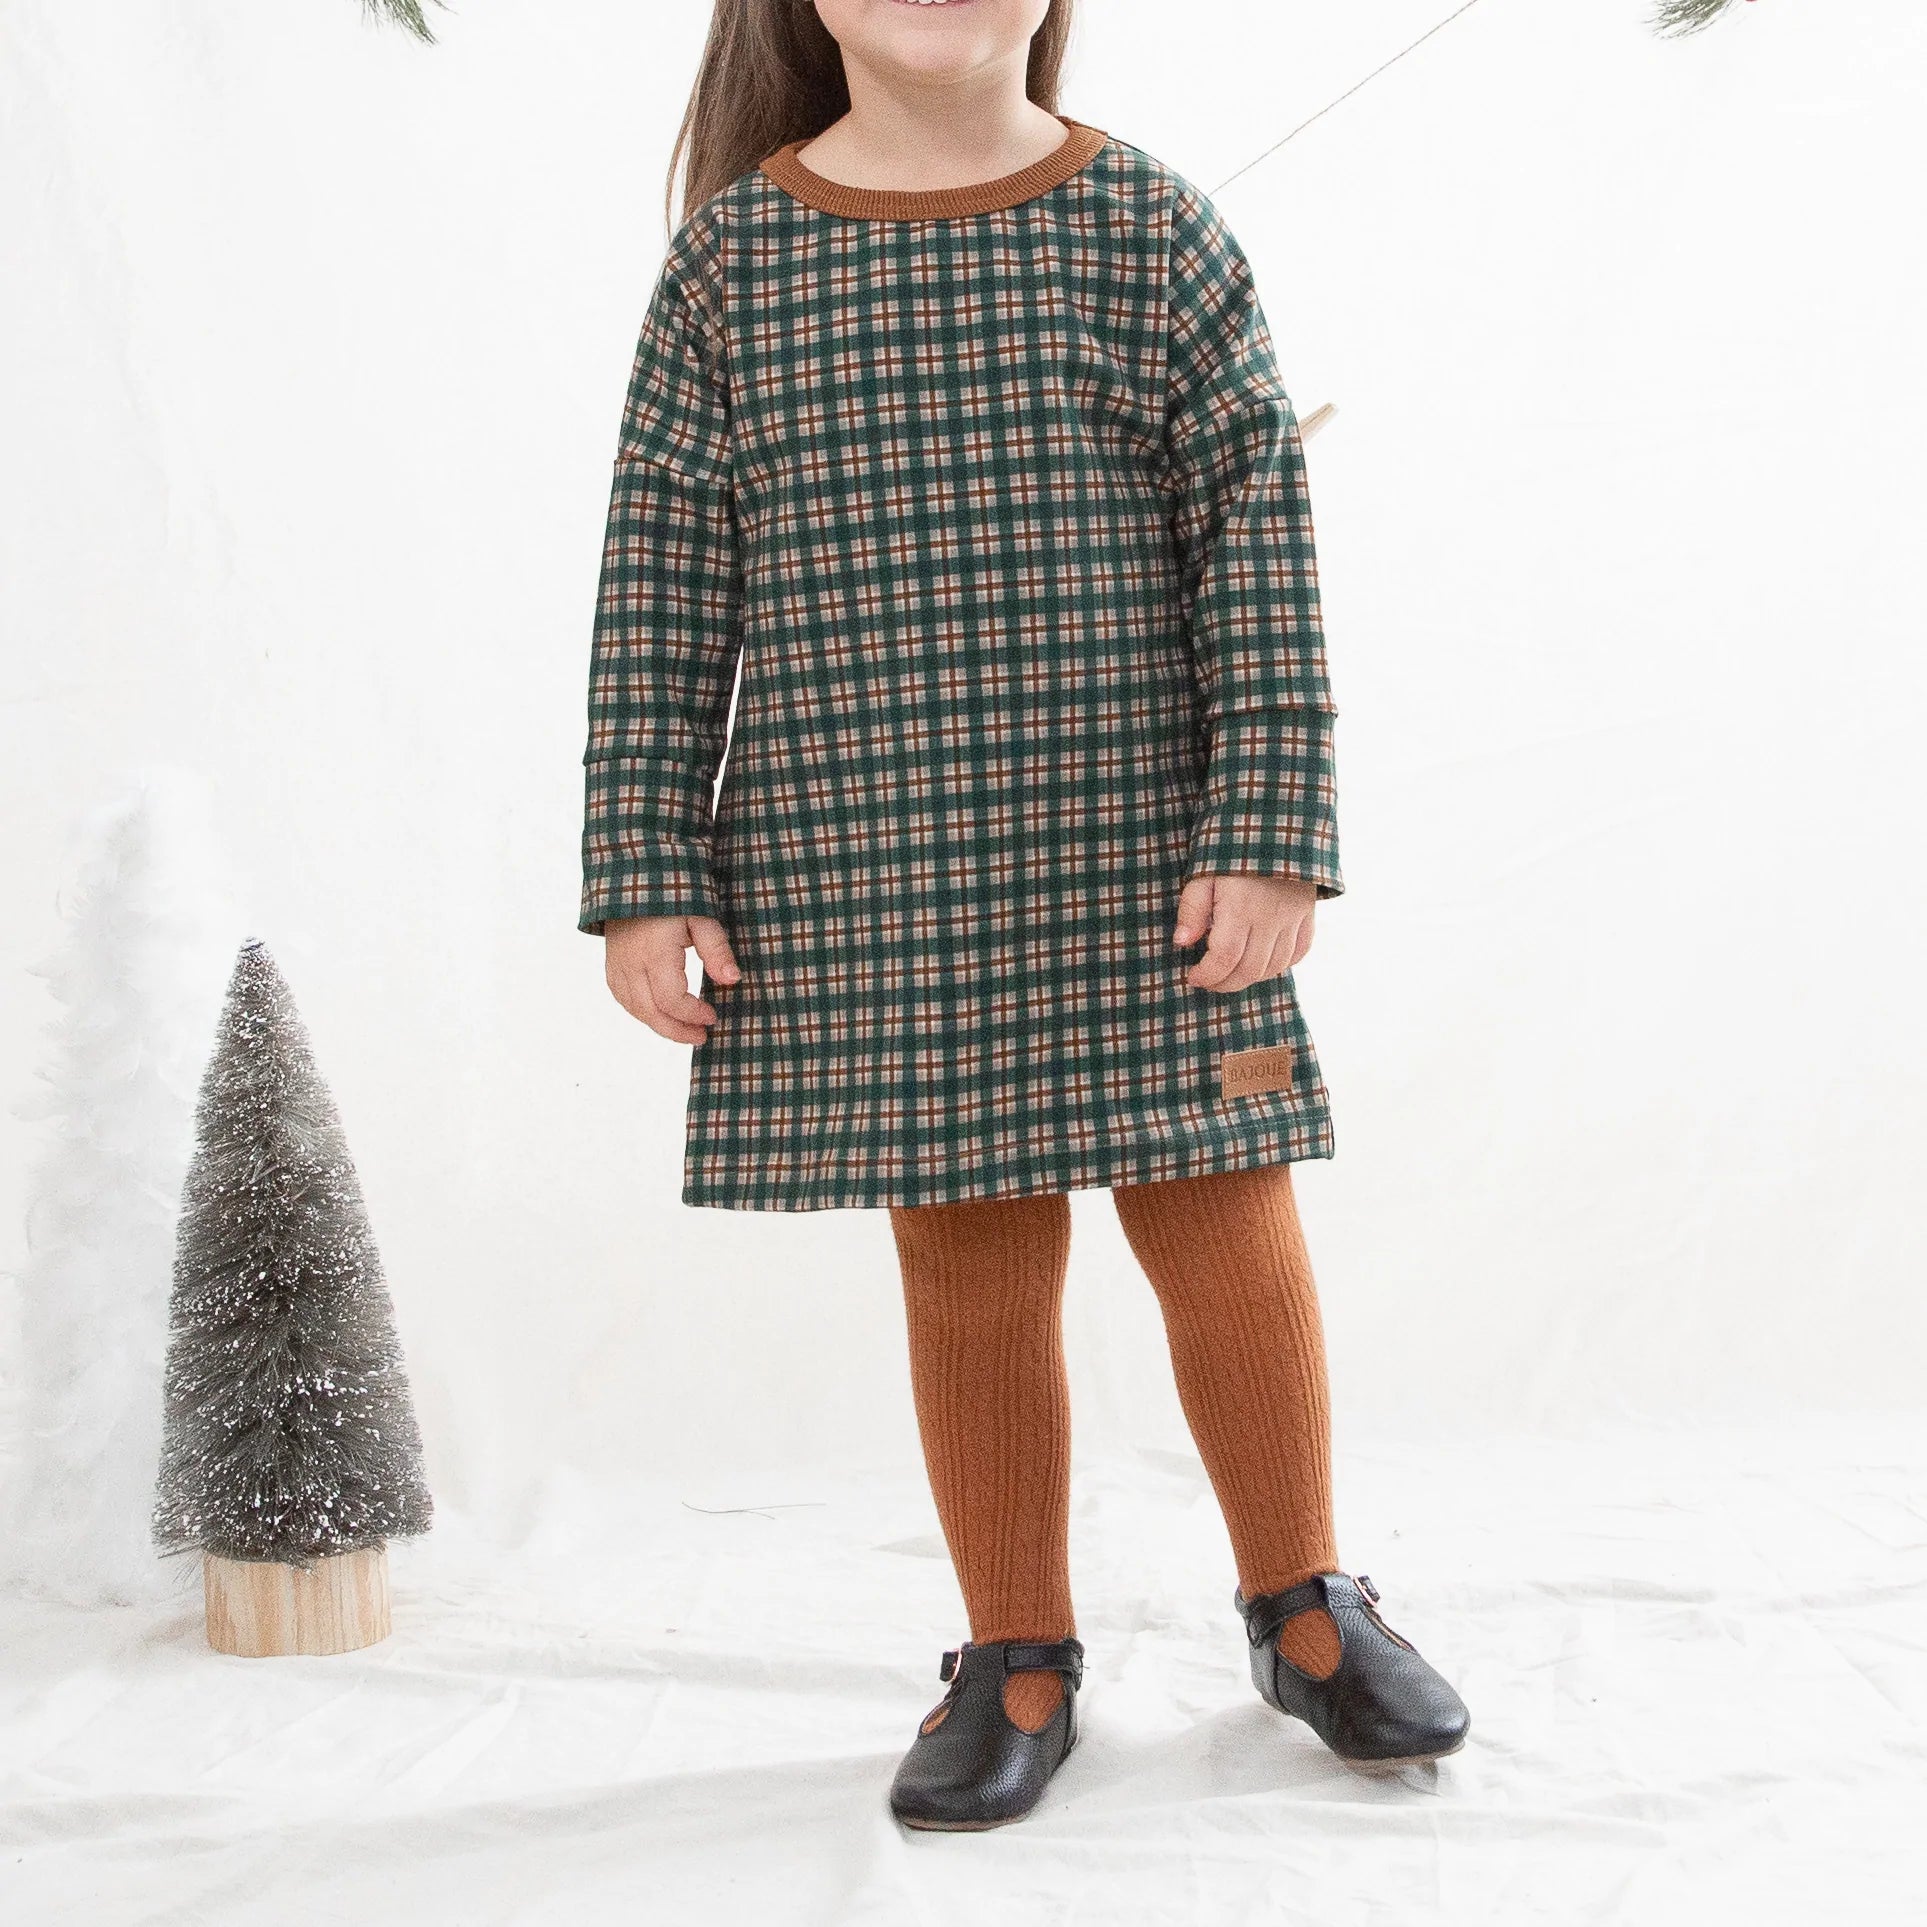 Dress for babies and children-Festive